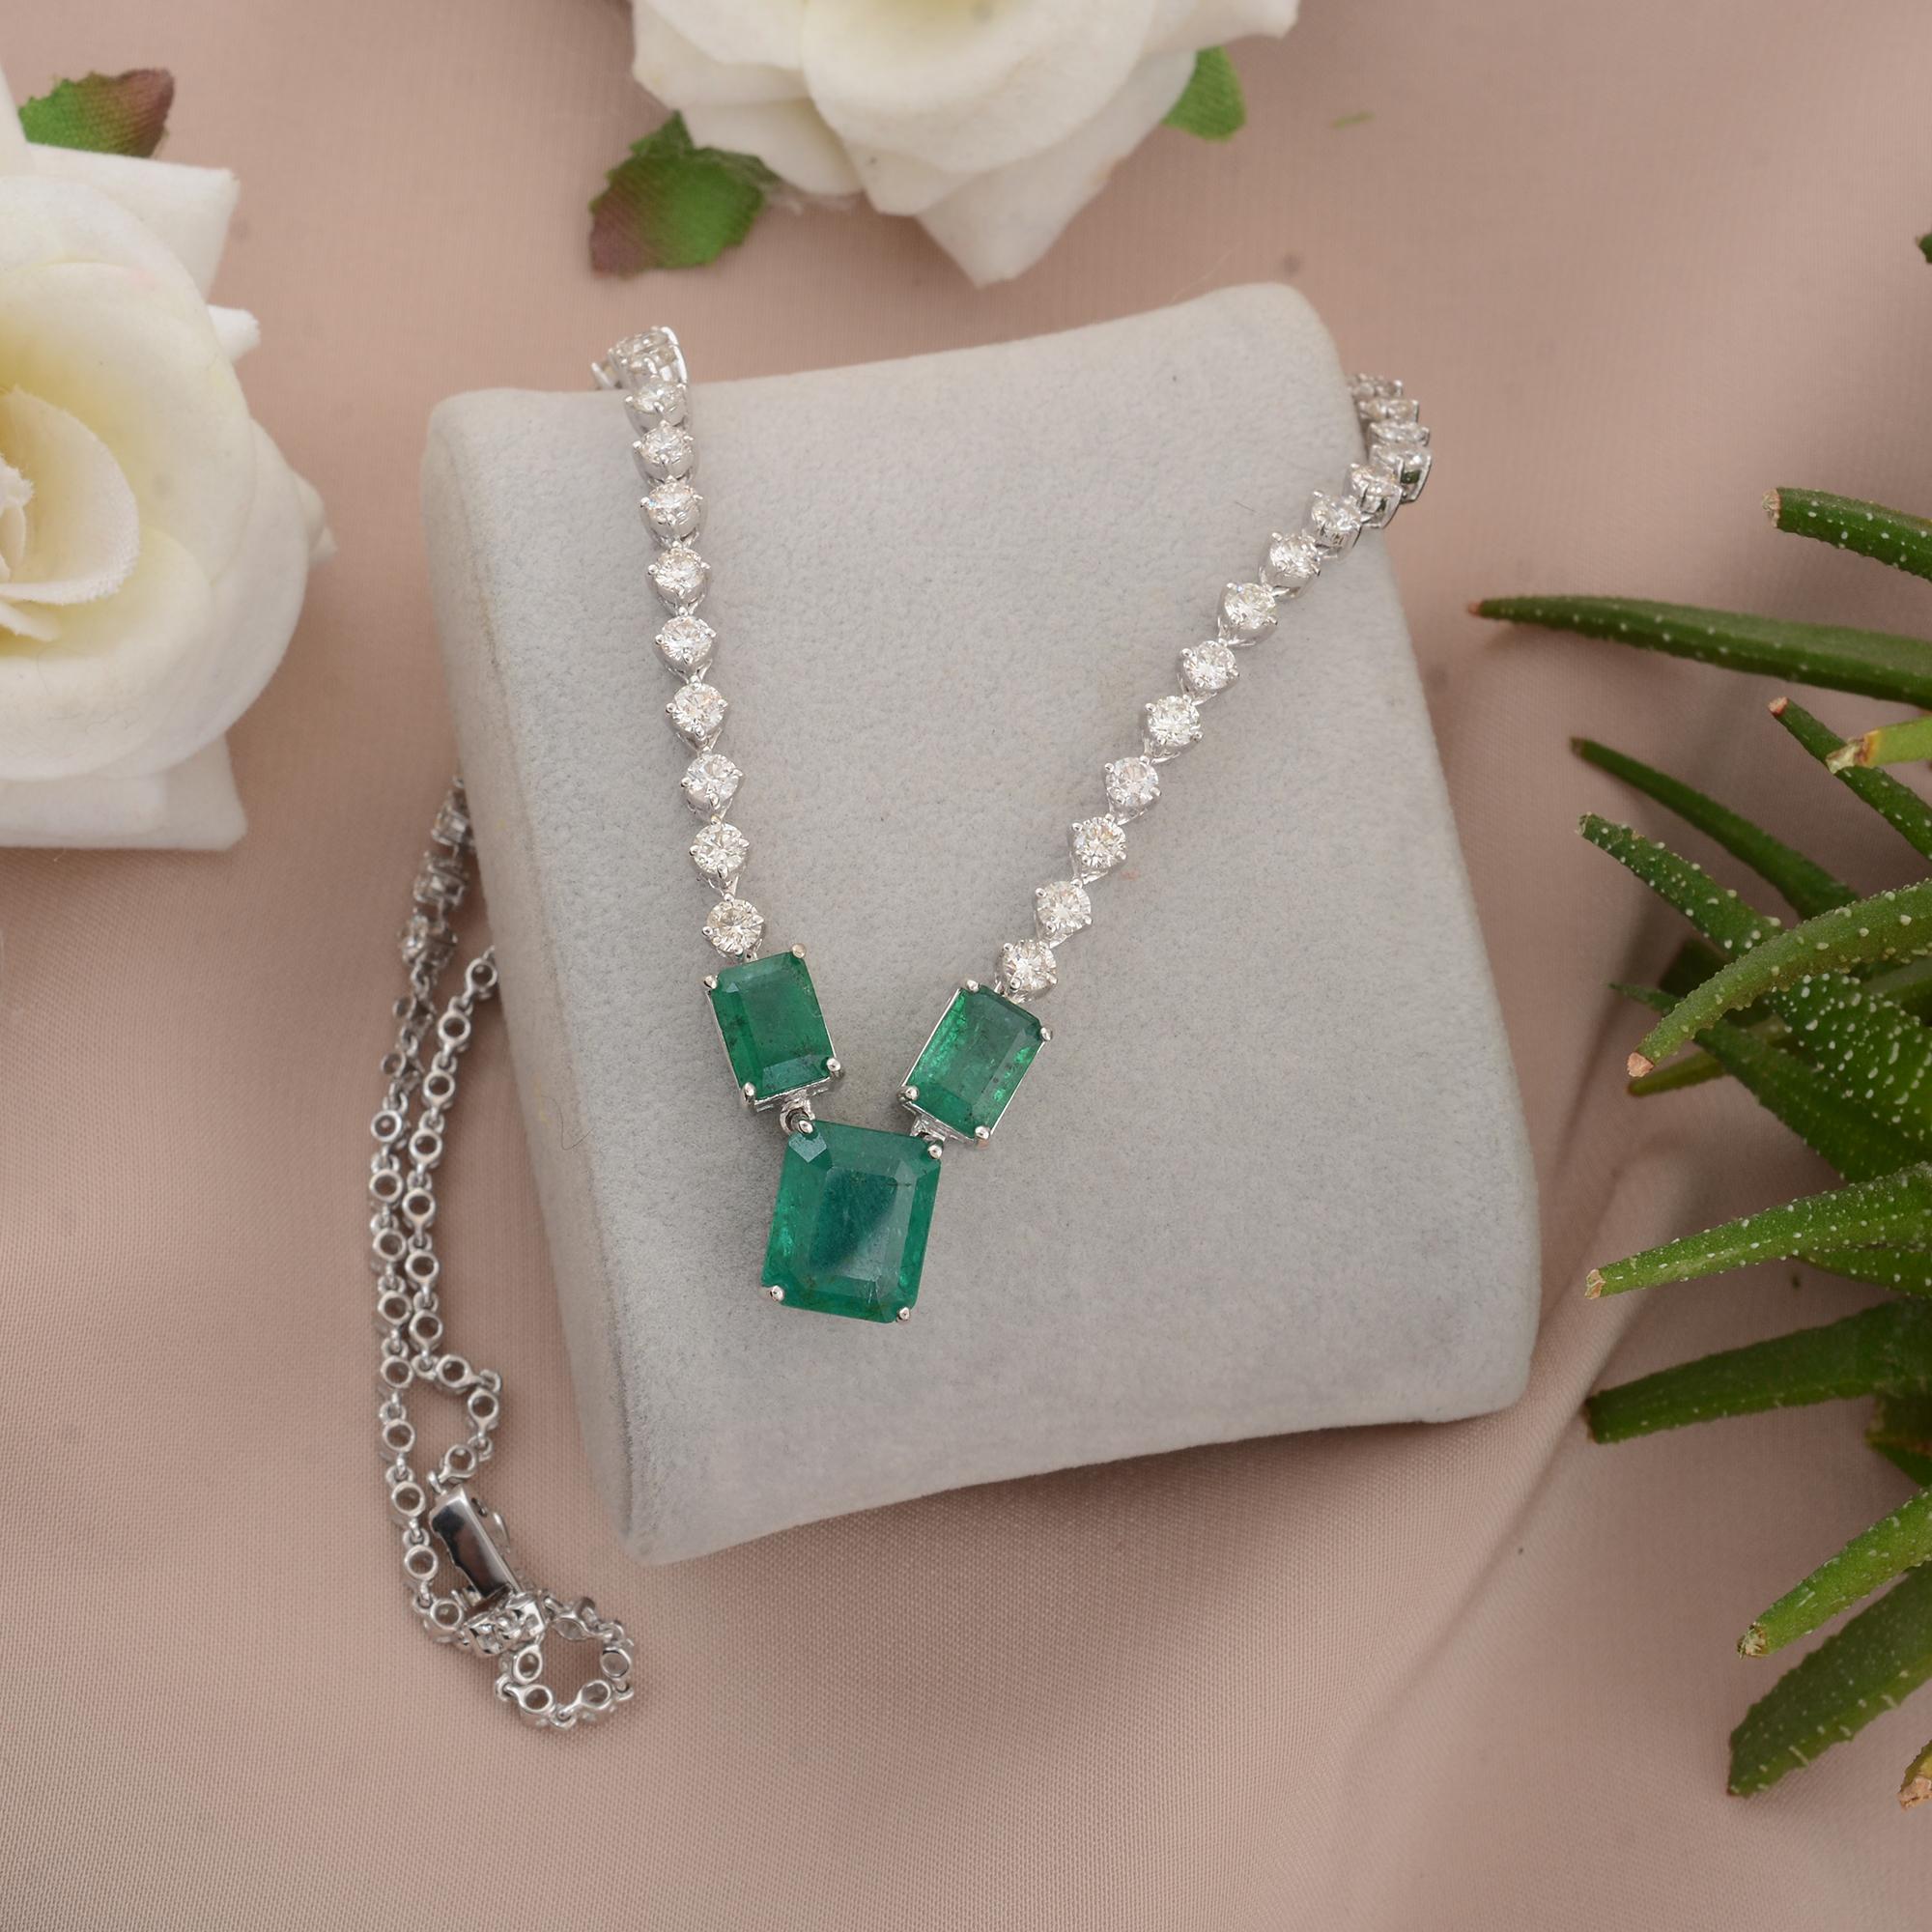 This exquisite pendant necklace showcases the captivating beauty of a Zambian Emerald gemstone, meticulously crafted in 18 karat white gold and accented with dazzling diamonds. This piece of fine jewelry is the epitome of elegance and luxury,